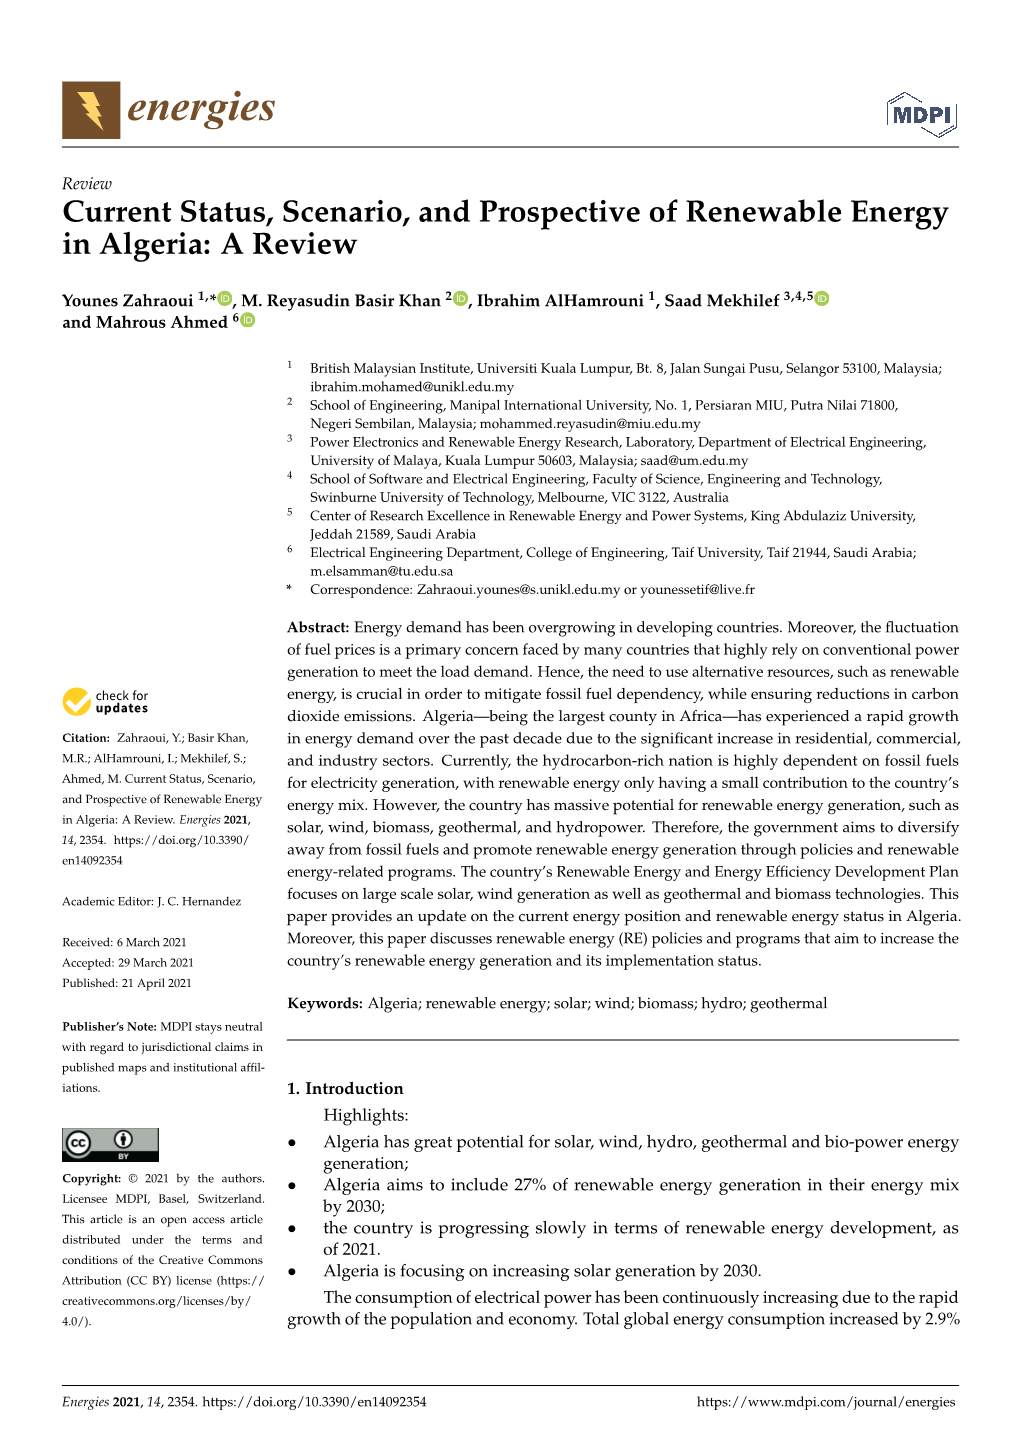 Current Status, Scenario, and Prospective of Renewable Energy in Algeria: a Review